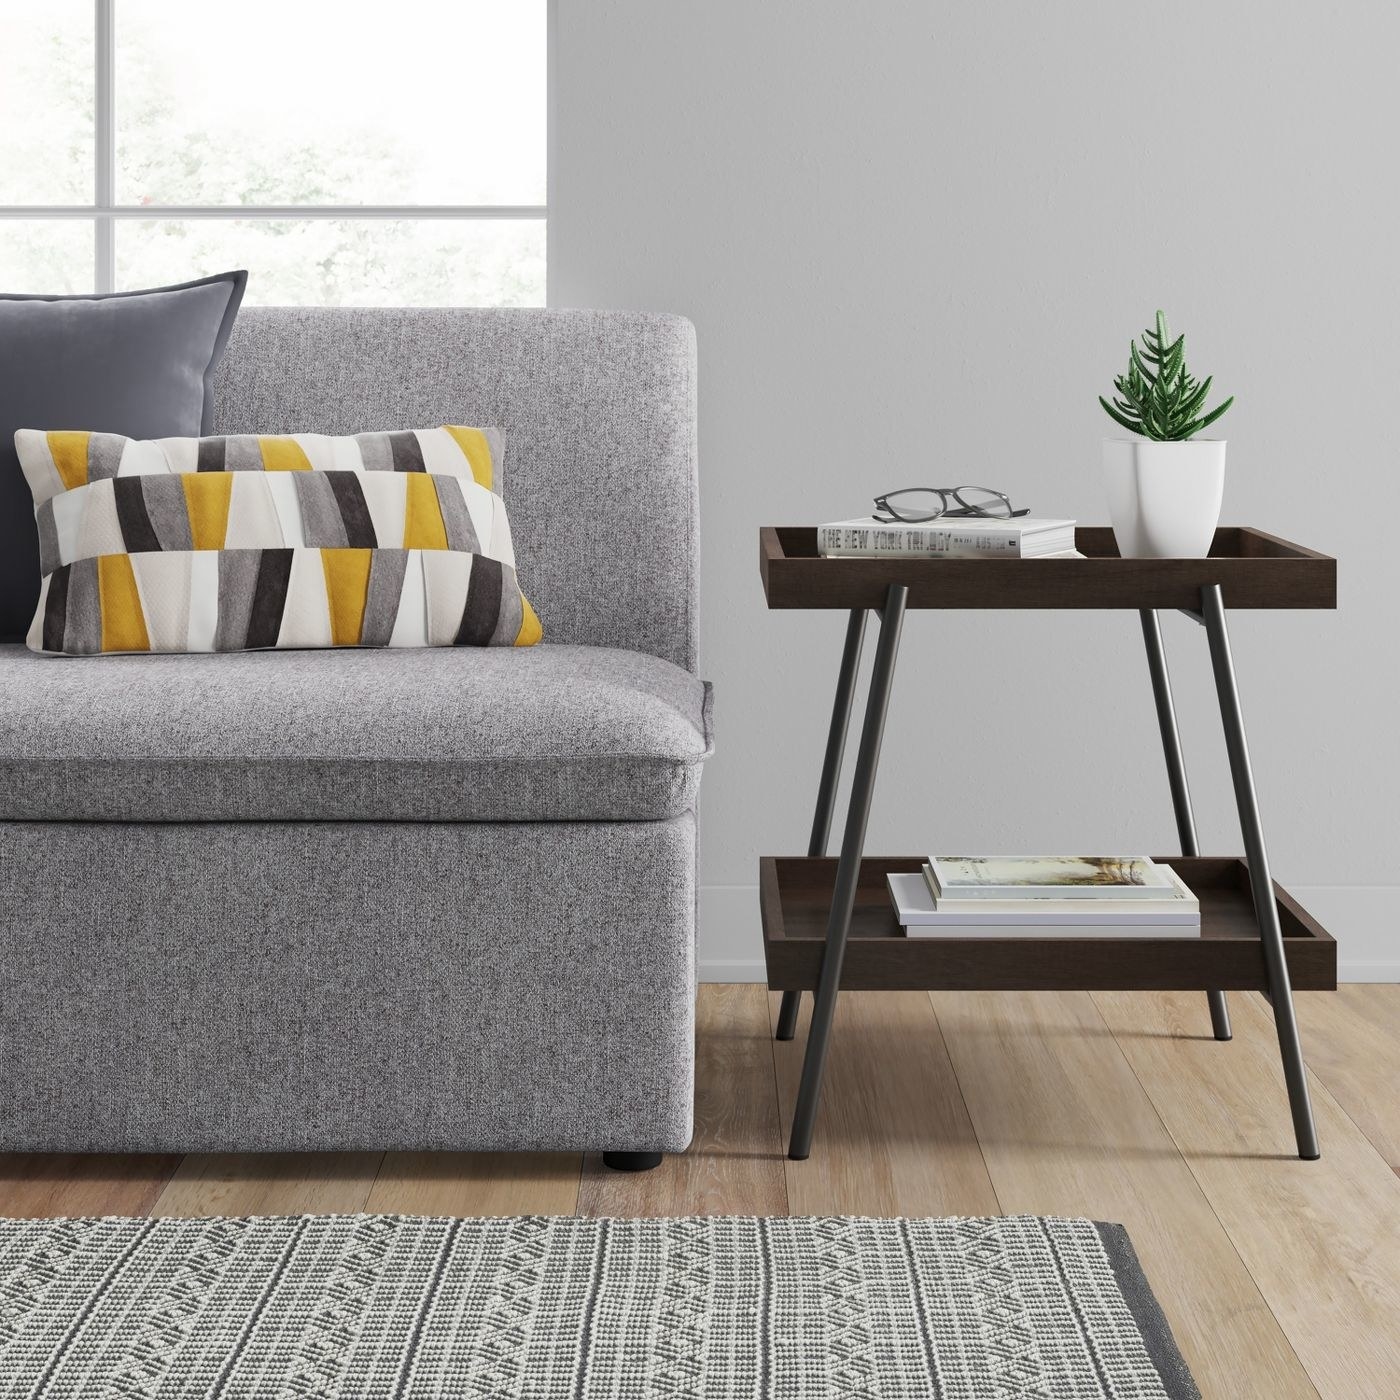 dark brown two-tier side table next to a gray couch